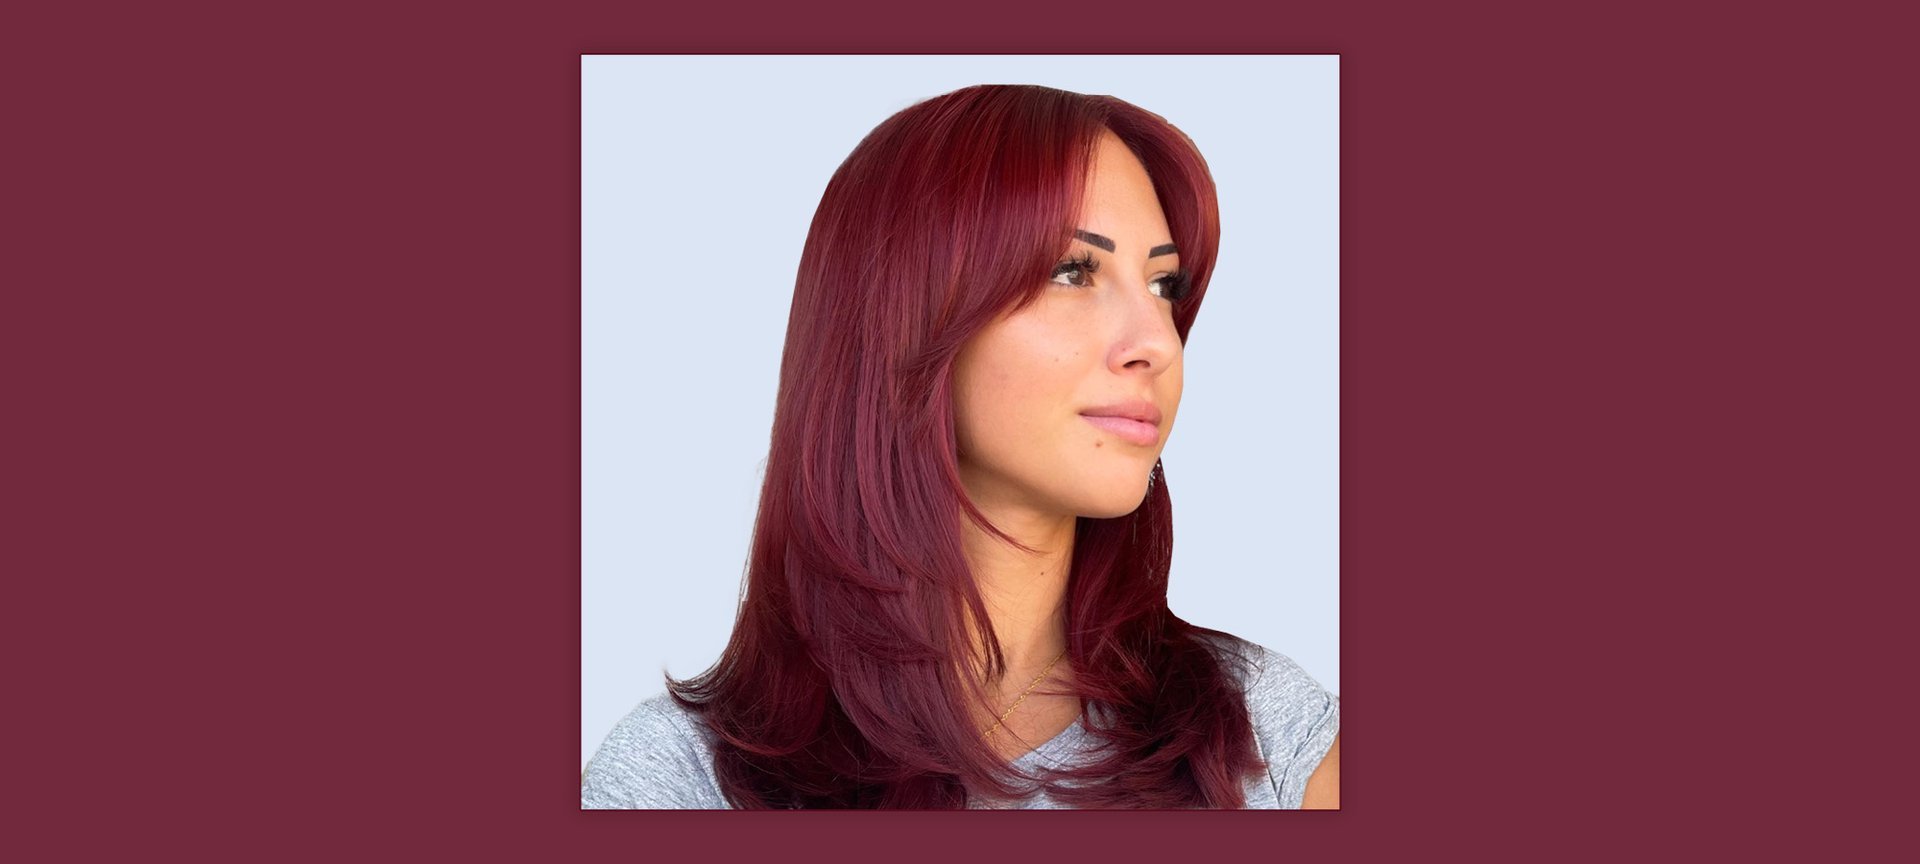 https://www.lorealparisusa.com/-/media/project/loreal/brand-sites/oap/americas/us/beauty-magazine/2023/11-november/11-13/how-to-bright-cherry-red-hair-color/person-with-cherry-red-hair-color.jpg